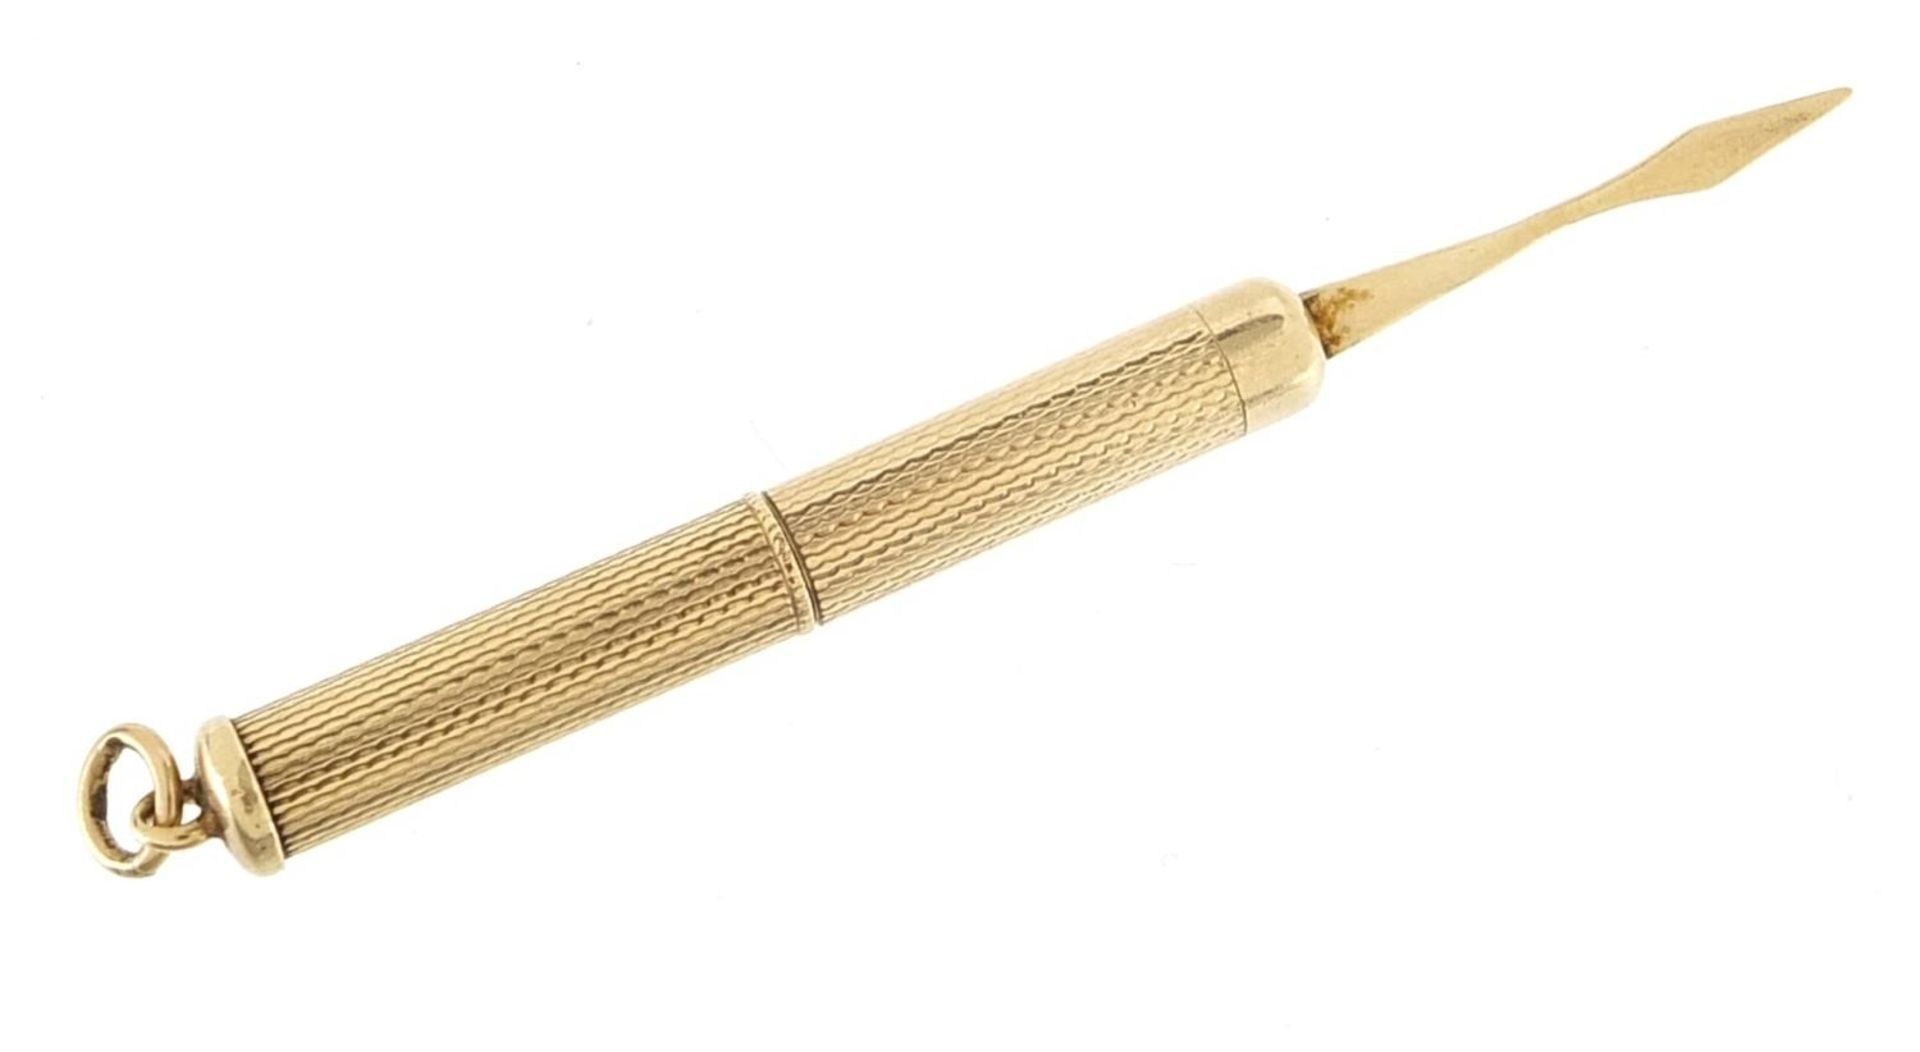 9ct gold propelling toothpick with engine turned decoration, 5.0cm in length un-extended, 6.6g - Image 2 of 3